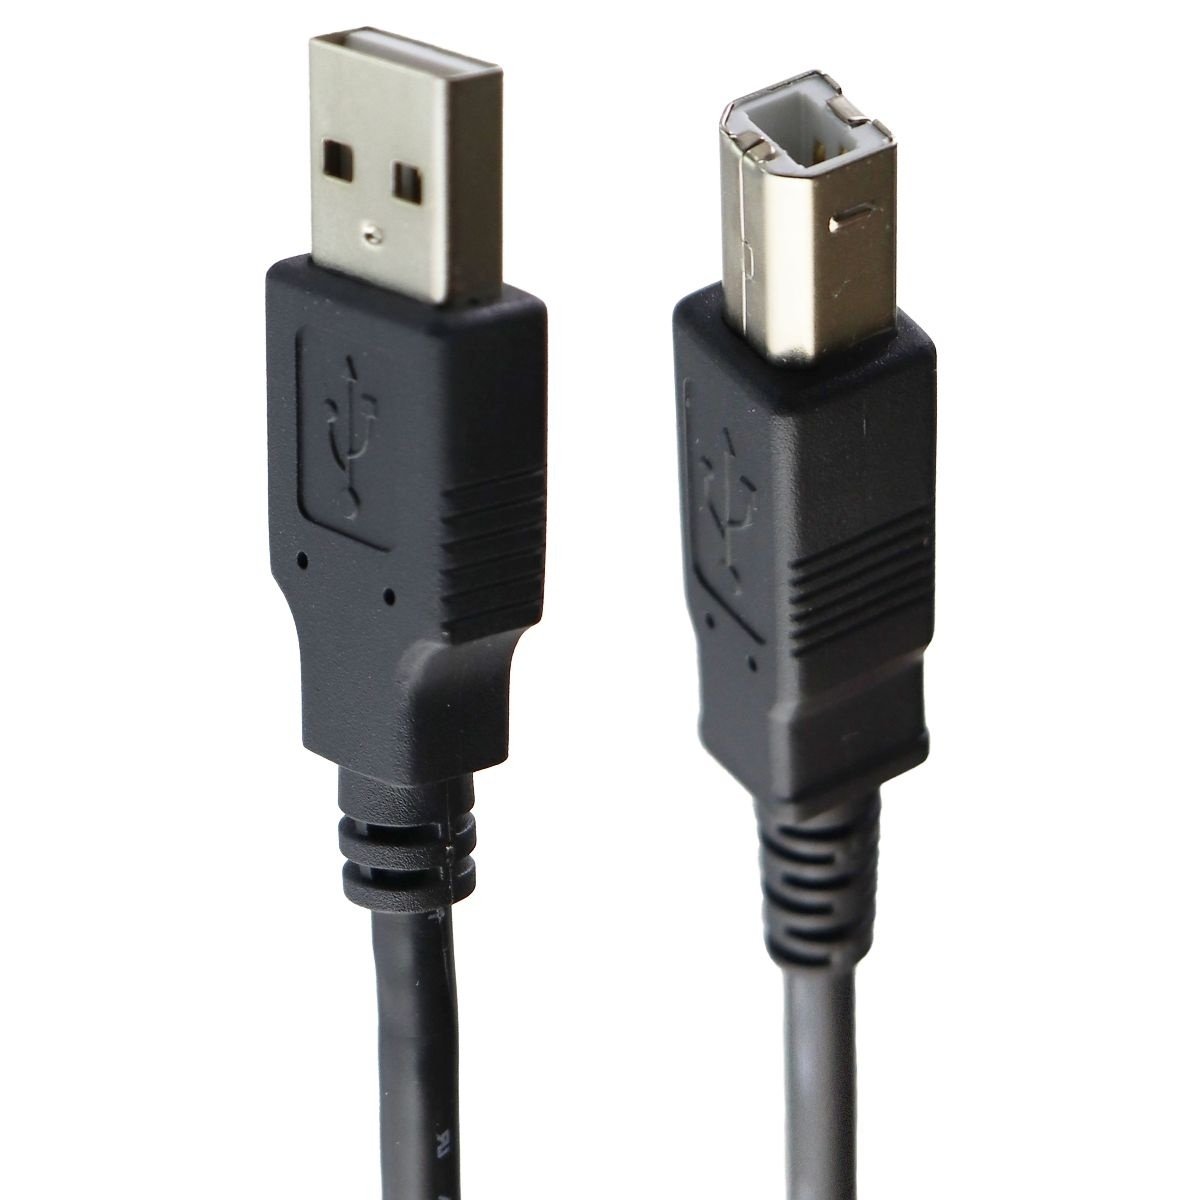 Universal USB-A Male To USB-B Male Printer USB Cable - Mixed Lengths & Styles